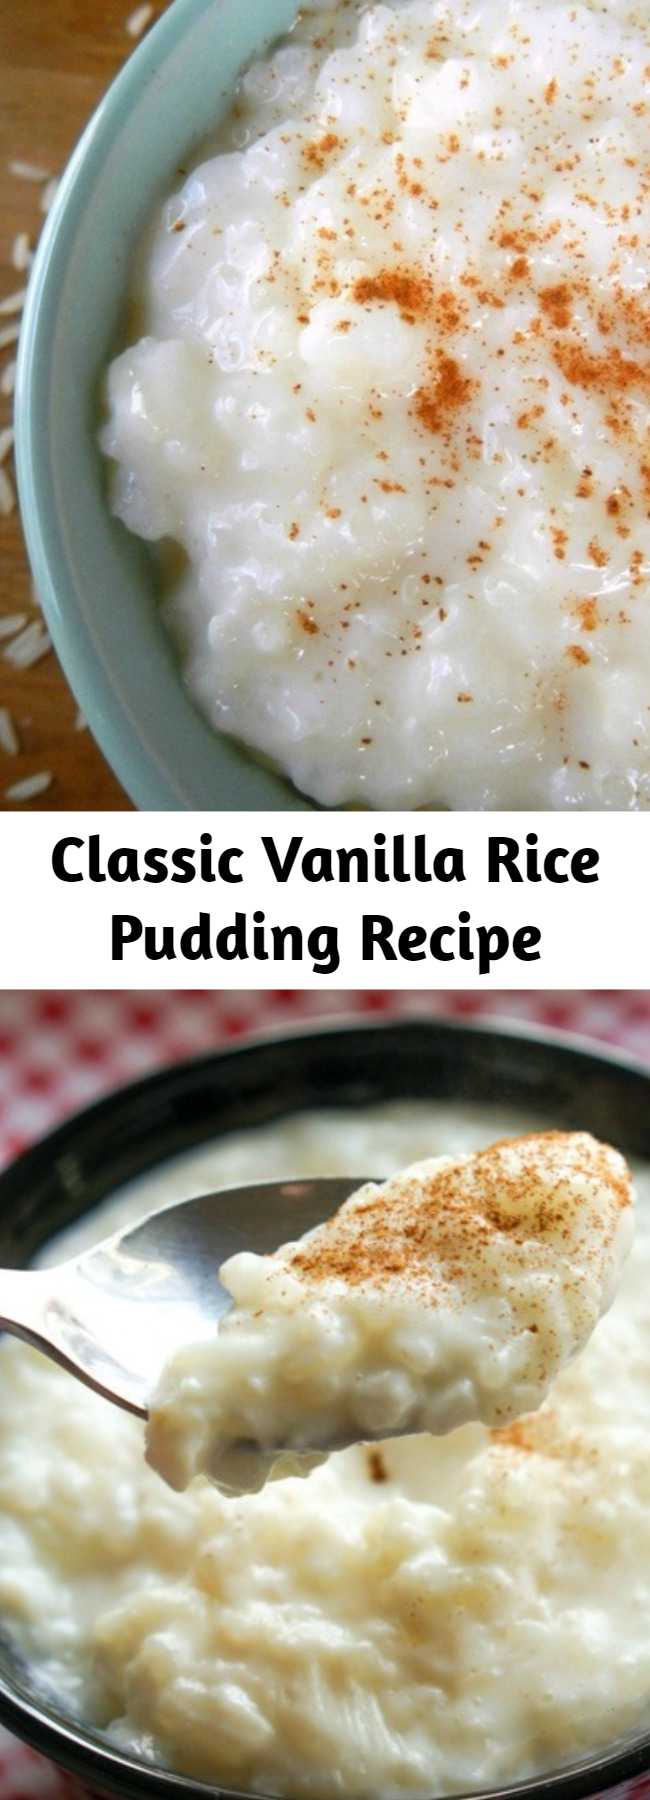 Classic Vanilla Rice Pudding Recipe - This Classic Vanilla Rice Pudding is simple to make and highlights the flavor of vanilla as the crown jewel. A favorite recipe of mine with a sprinkle of cinnamon!